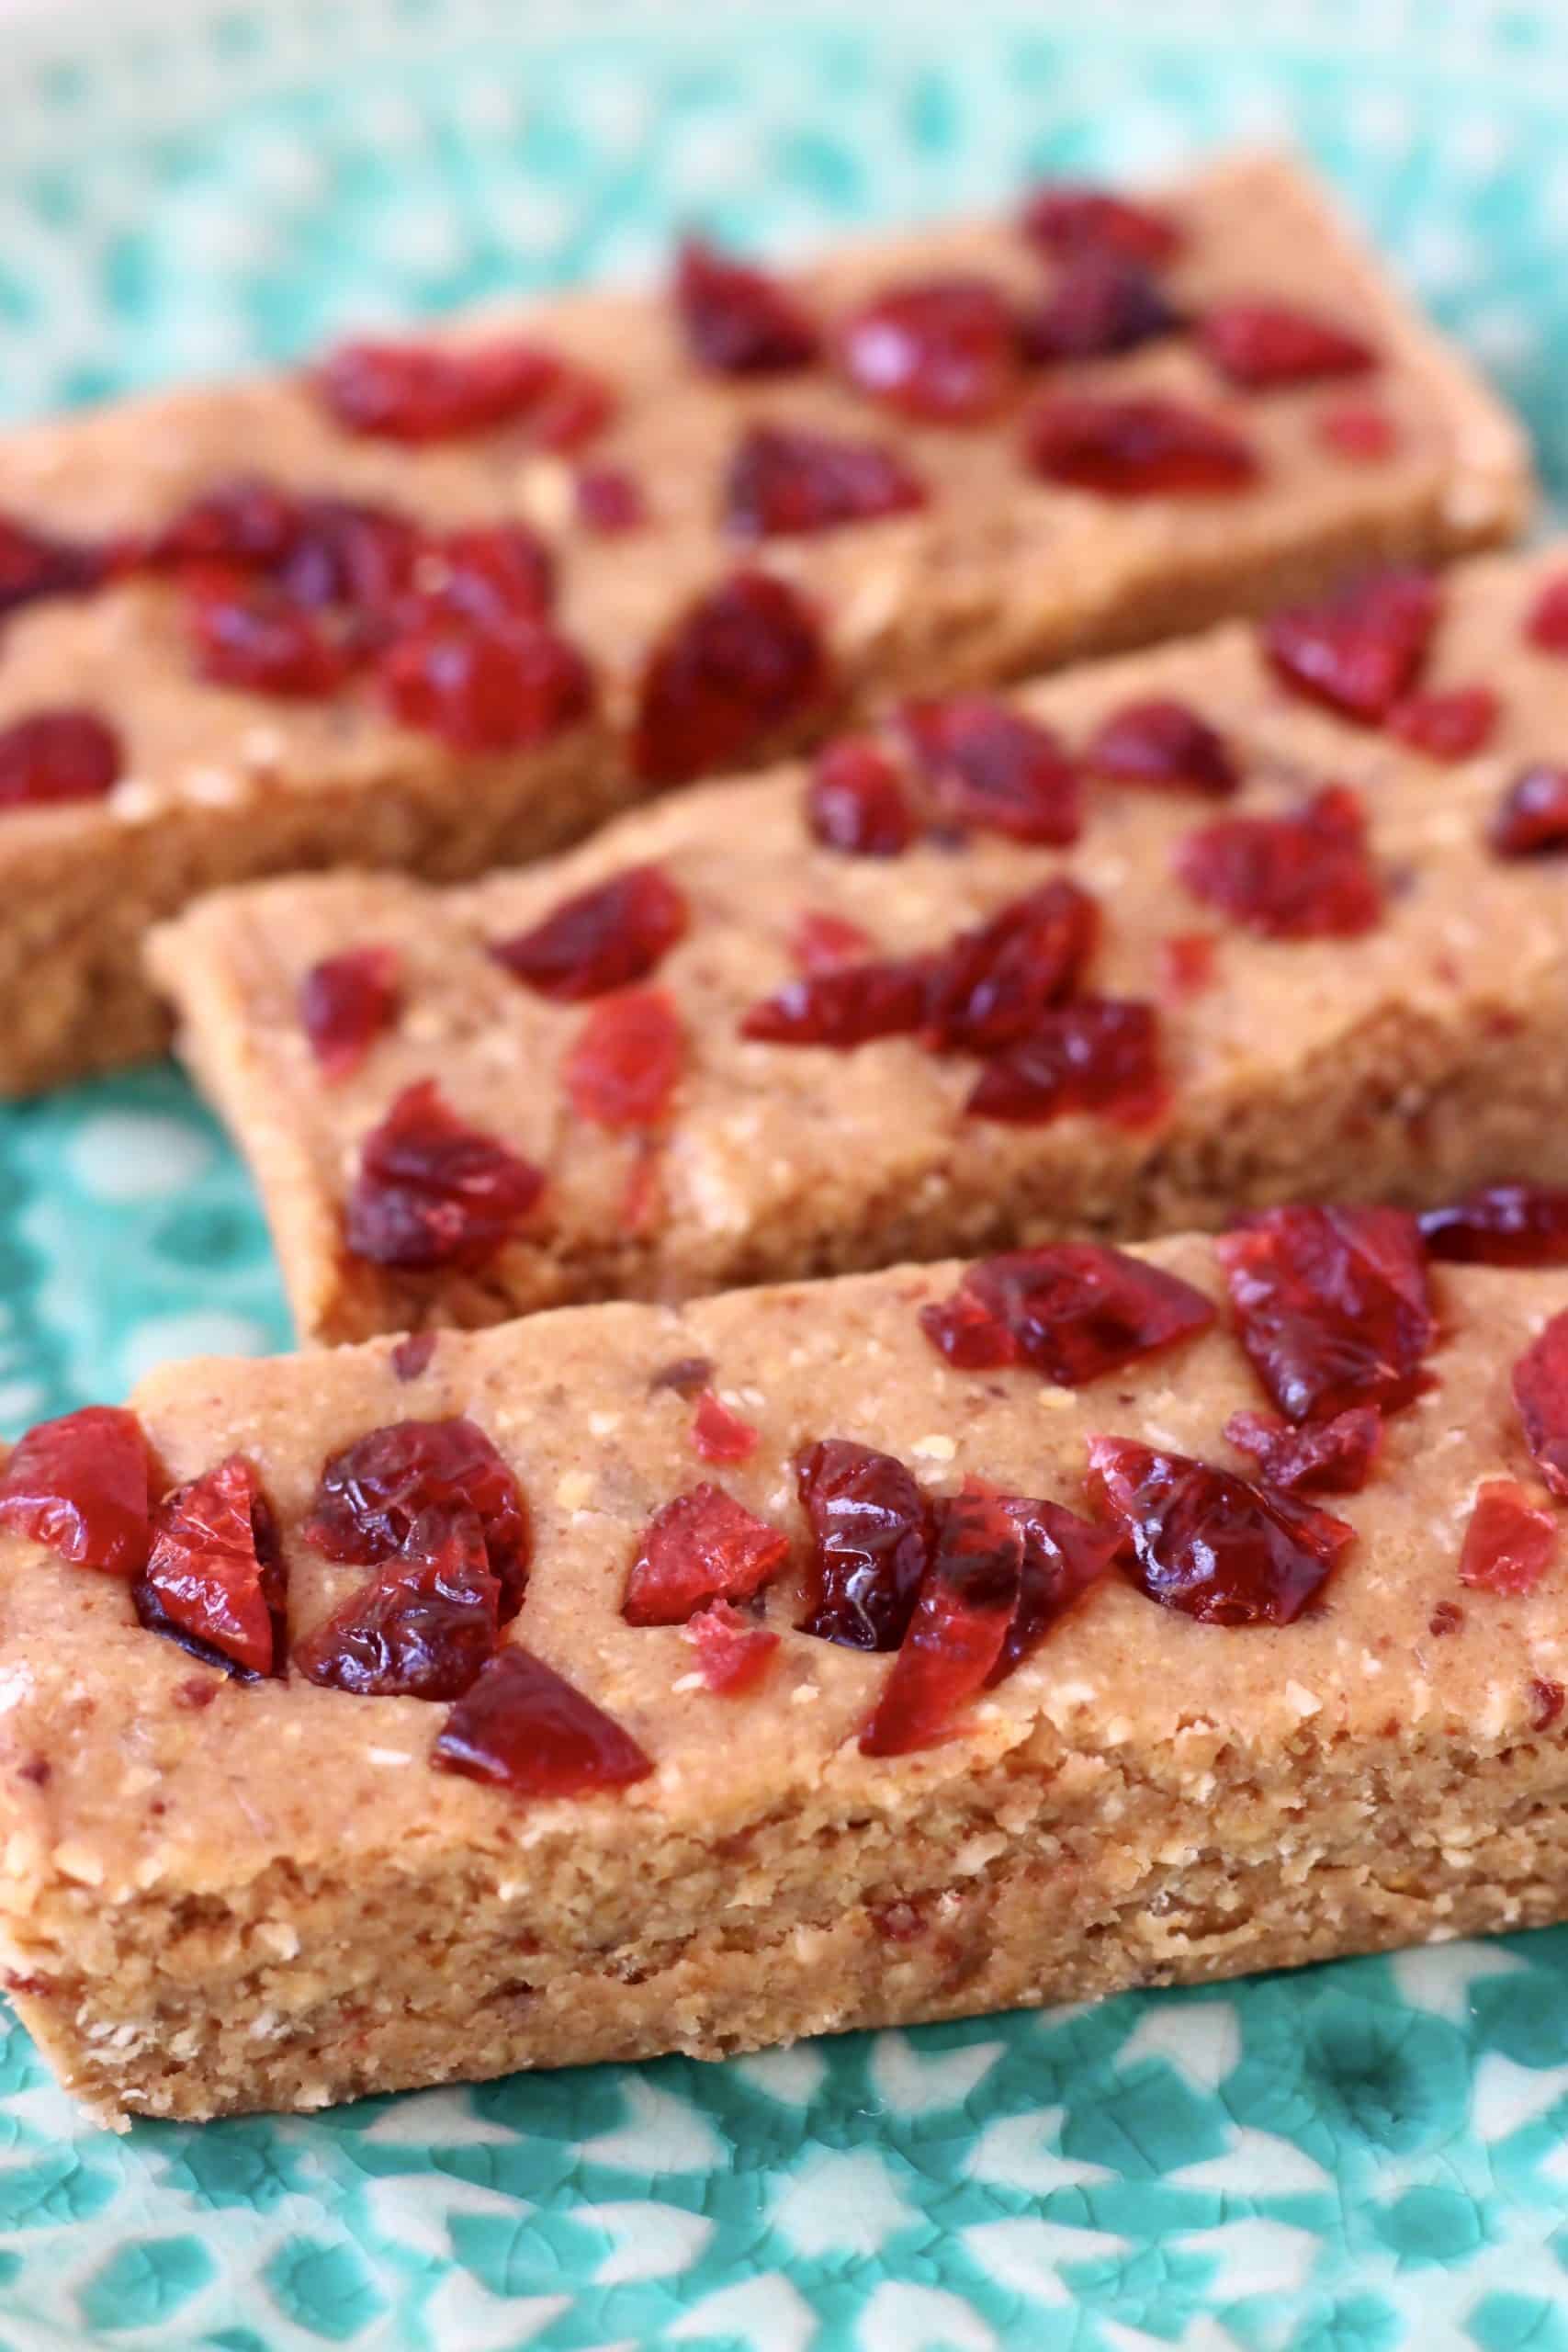 Three protein bars topped with dried cranberries on a blue plate